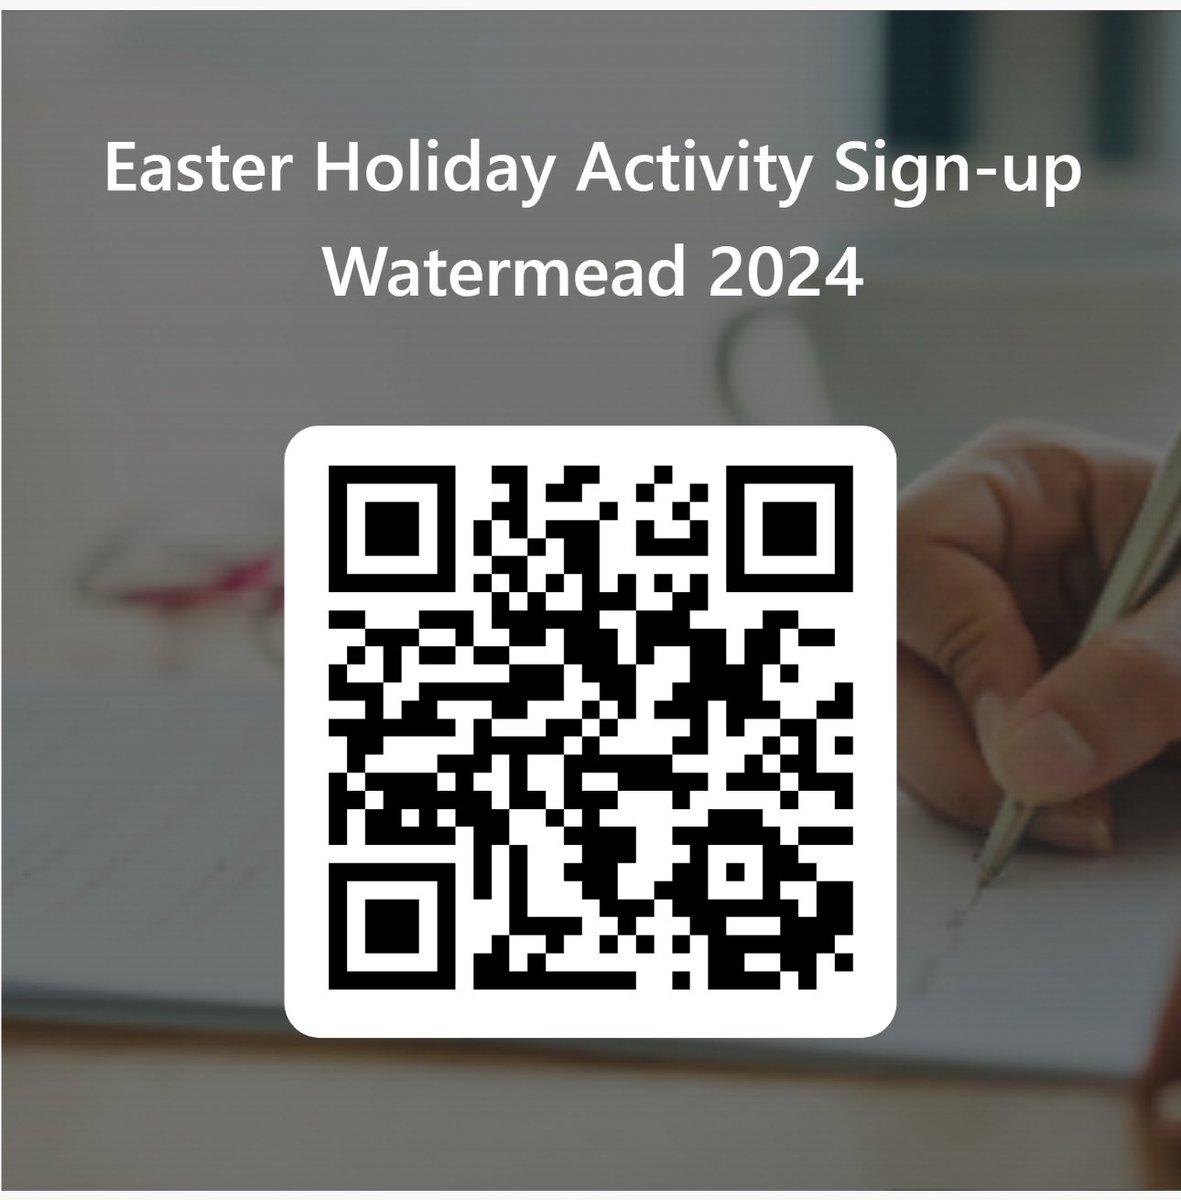 Sign up for our exciting Easter holiday activities by scanning this QR code! This time we have circus skills, an animal visit, trampolining and ice skating on offer 🎪⛸️🐾 #watermeadway #wearewatermead #oawatermead #ocl #oasiscommunitylearning #sheffieldschools